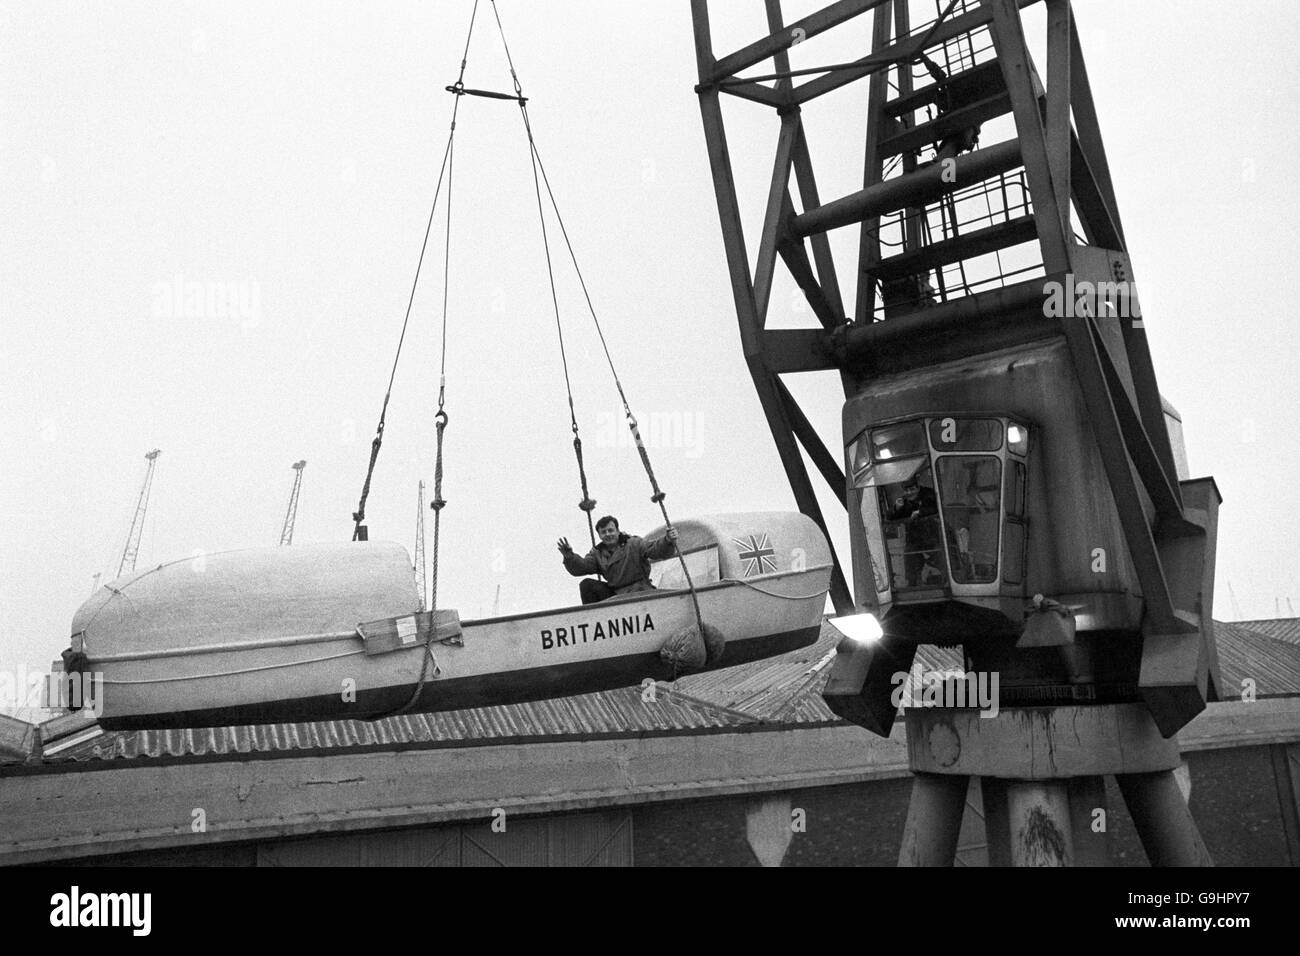 1,500 rowing boat which he hopes to row across the Atlantic and be the first man to do so single handed. It was being hoisted onto the Aragon at King George V Dock in London. The boat designed by Uffa Fox, is being shipped to Las Palmas, Canary Islands from where the attempt will be made to row the 3,500 miles to Florida, USA. Stock Photo